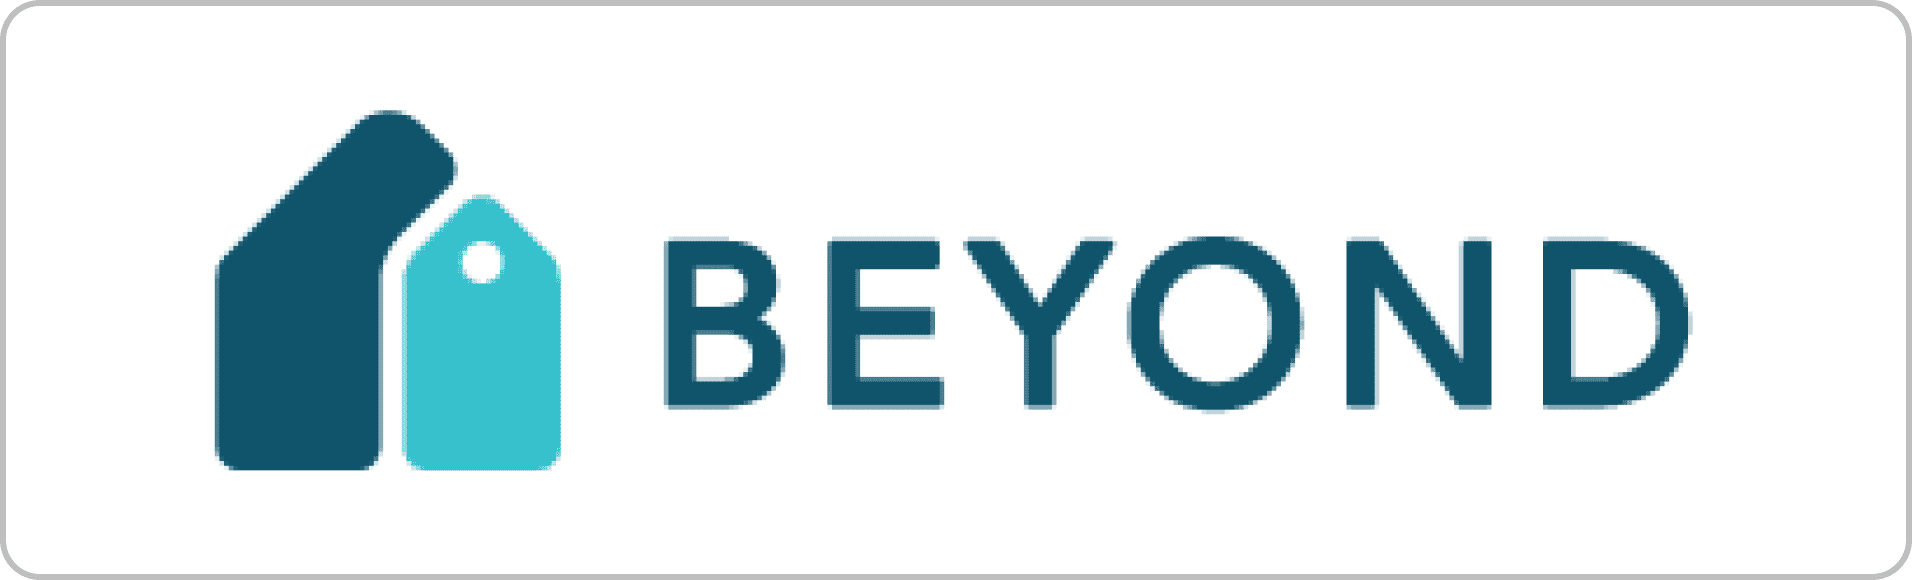 Airbnb Hosting A logo featuring the word "beyond" and incorporating elements related to Airbnb hosting.